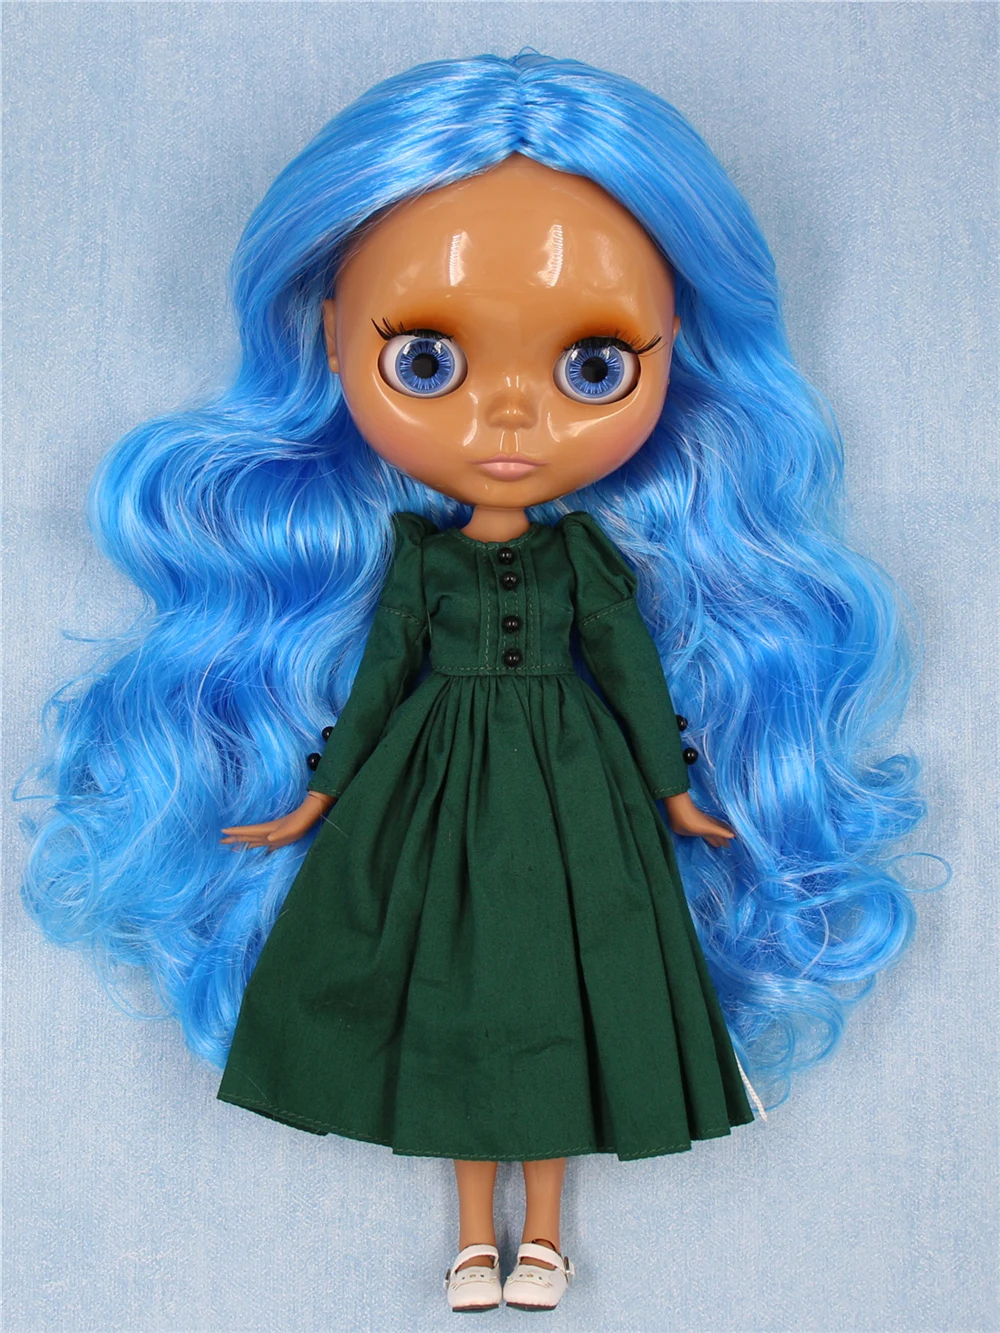 Neo Blythe Doll with Blue Hair, Dark Skin, Shiny Face & Factory Jointed Body 1